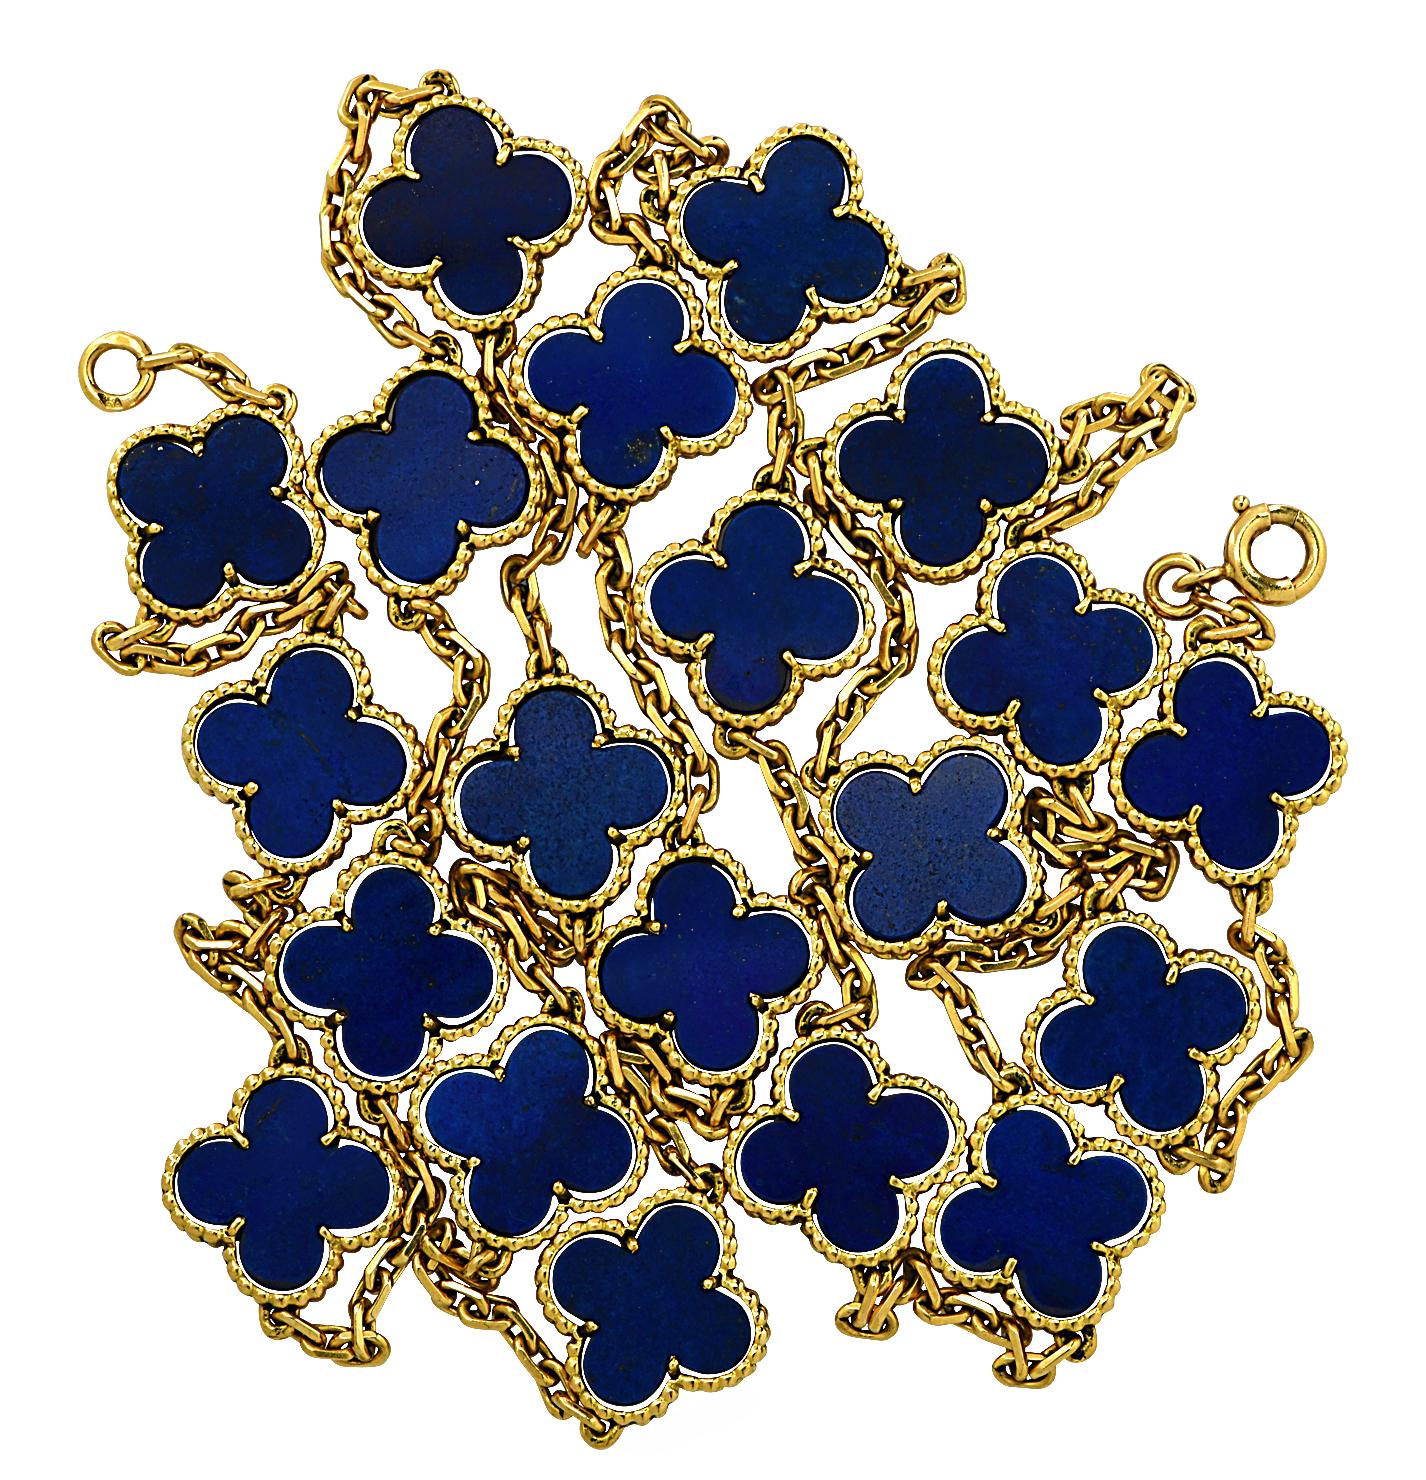 From the House of Van Cleef & Arpels, this exquisite Vintage Alhambra long necklace, 20 motifs, finely handmade in 18 Karat yellow gold, features an asymmetrical design inspired by the clover leaf. Twenty clover motifs embellished with blue lapis,